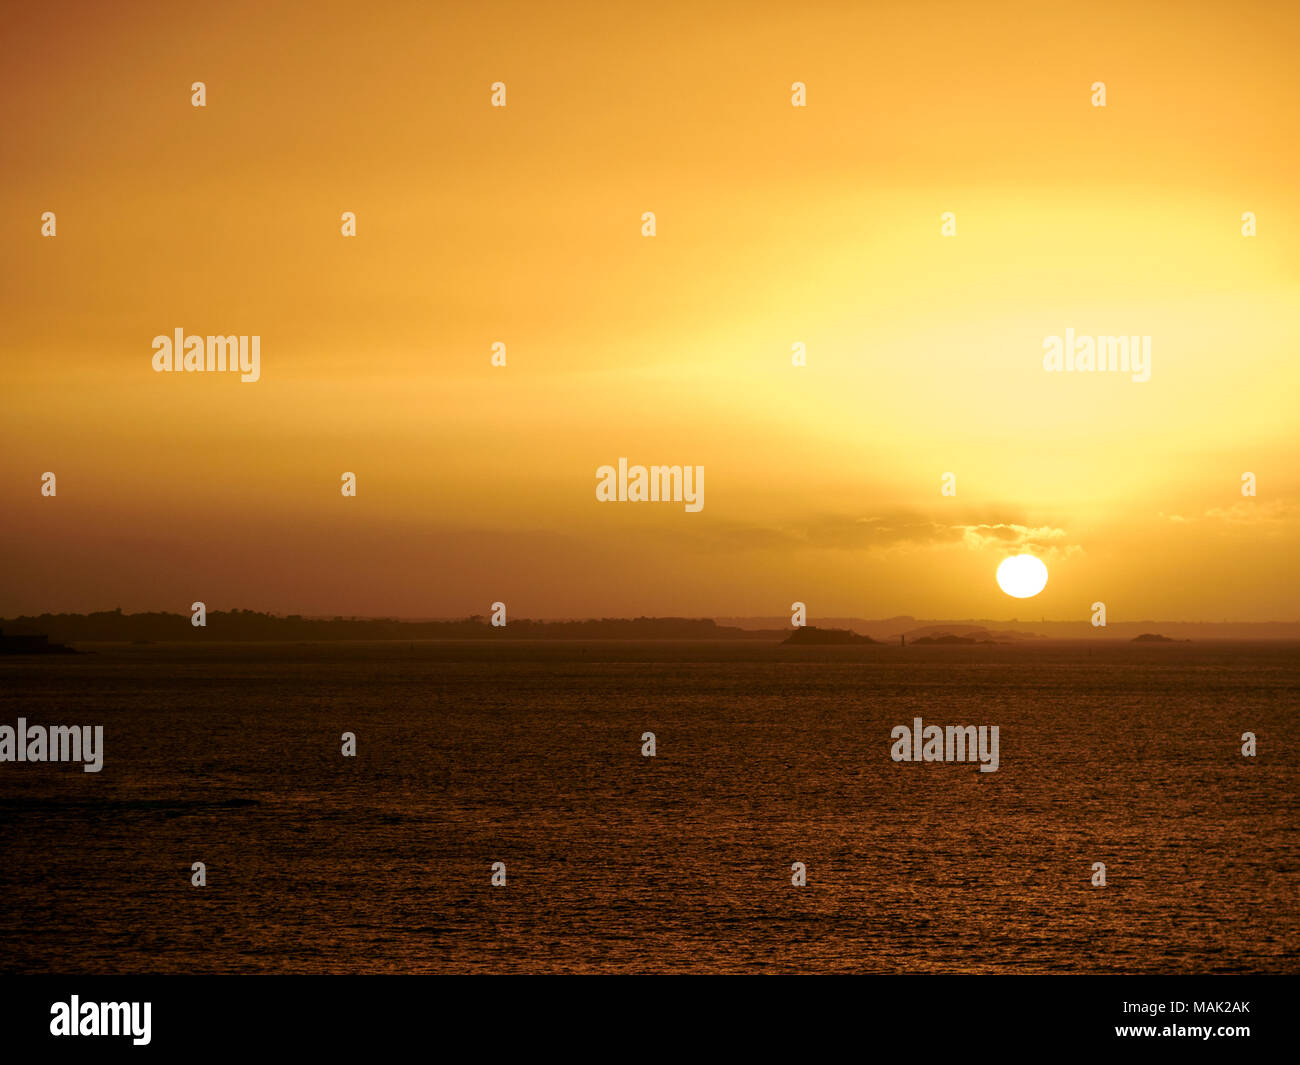 Image of Sunset over the sea, St Malo, France, Dust in the air. Stock Photo